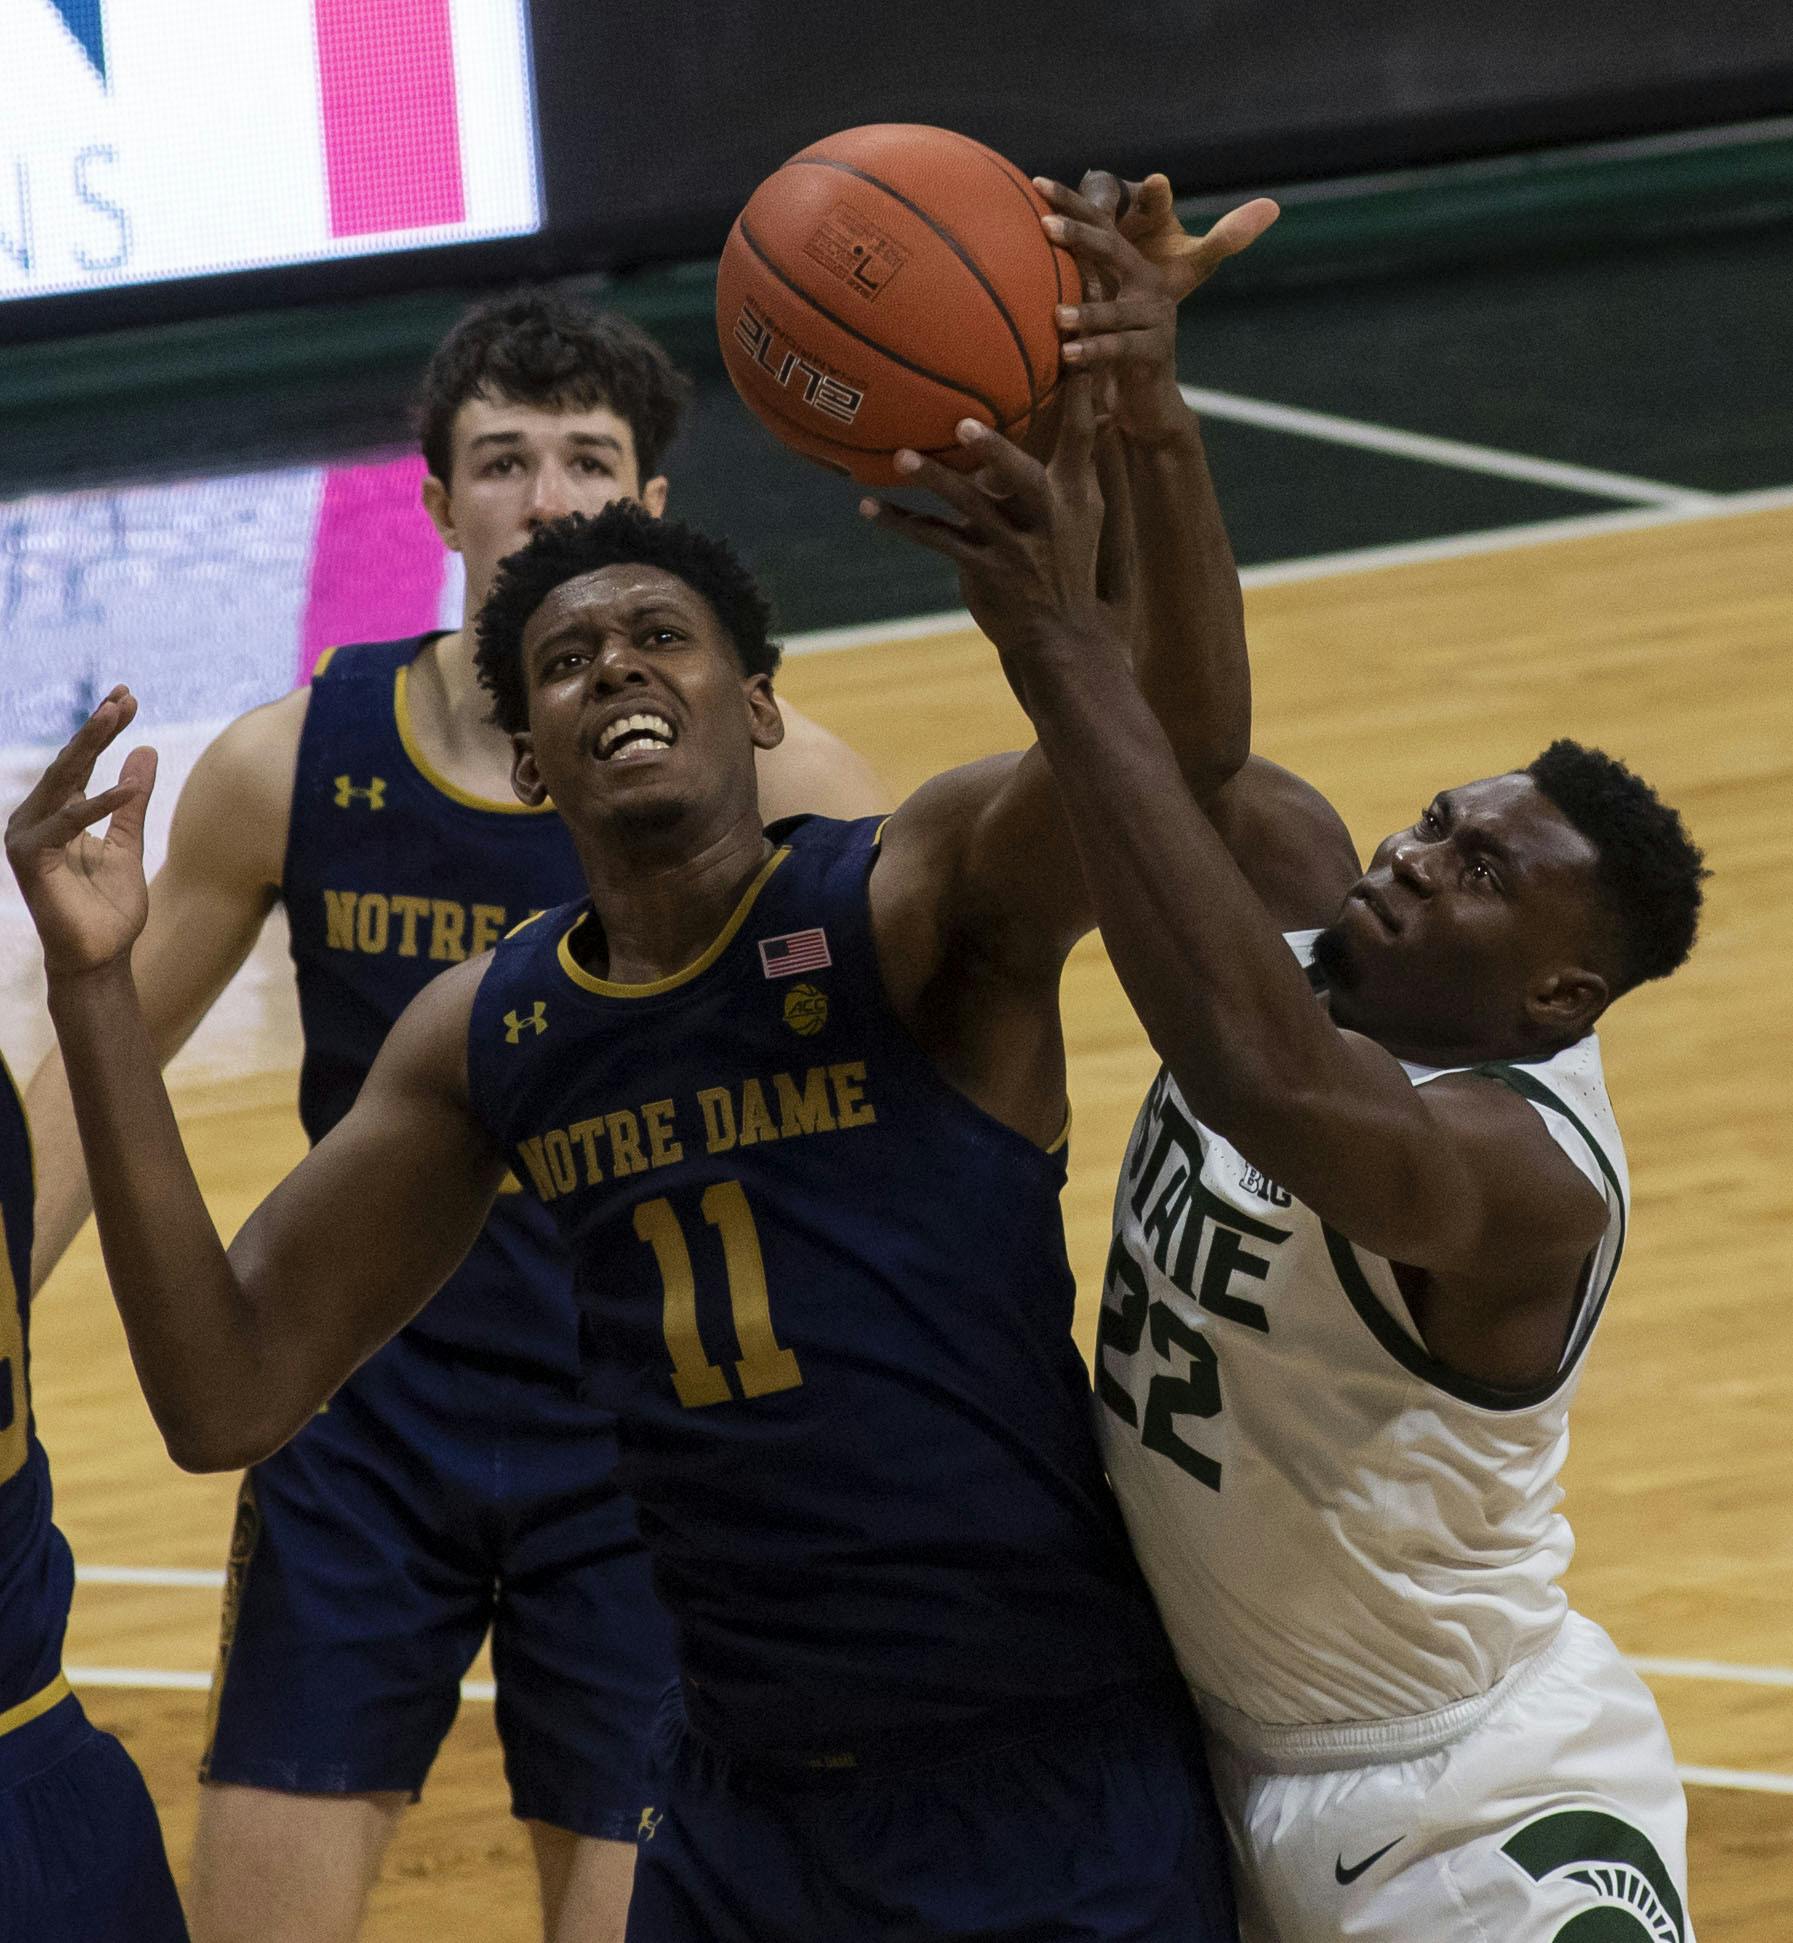 <p>Freshman center Mady Sissoko (22) fights to regain the ball after a failed shot at the basket in the second half. Michigan State triumphed over Notre Dame, 80-70, on Nov. 28, 2020. </p>